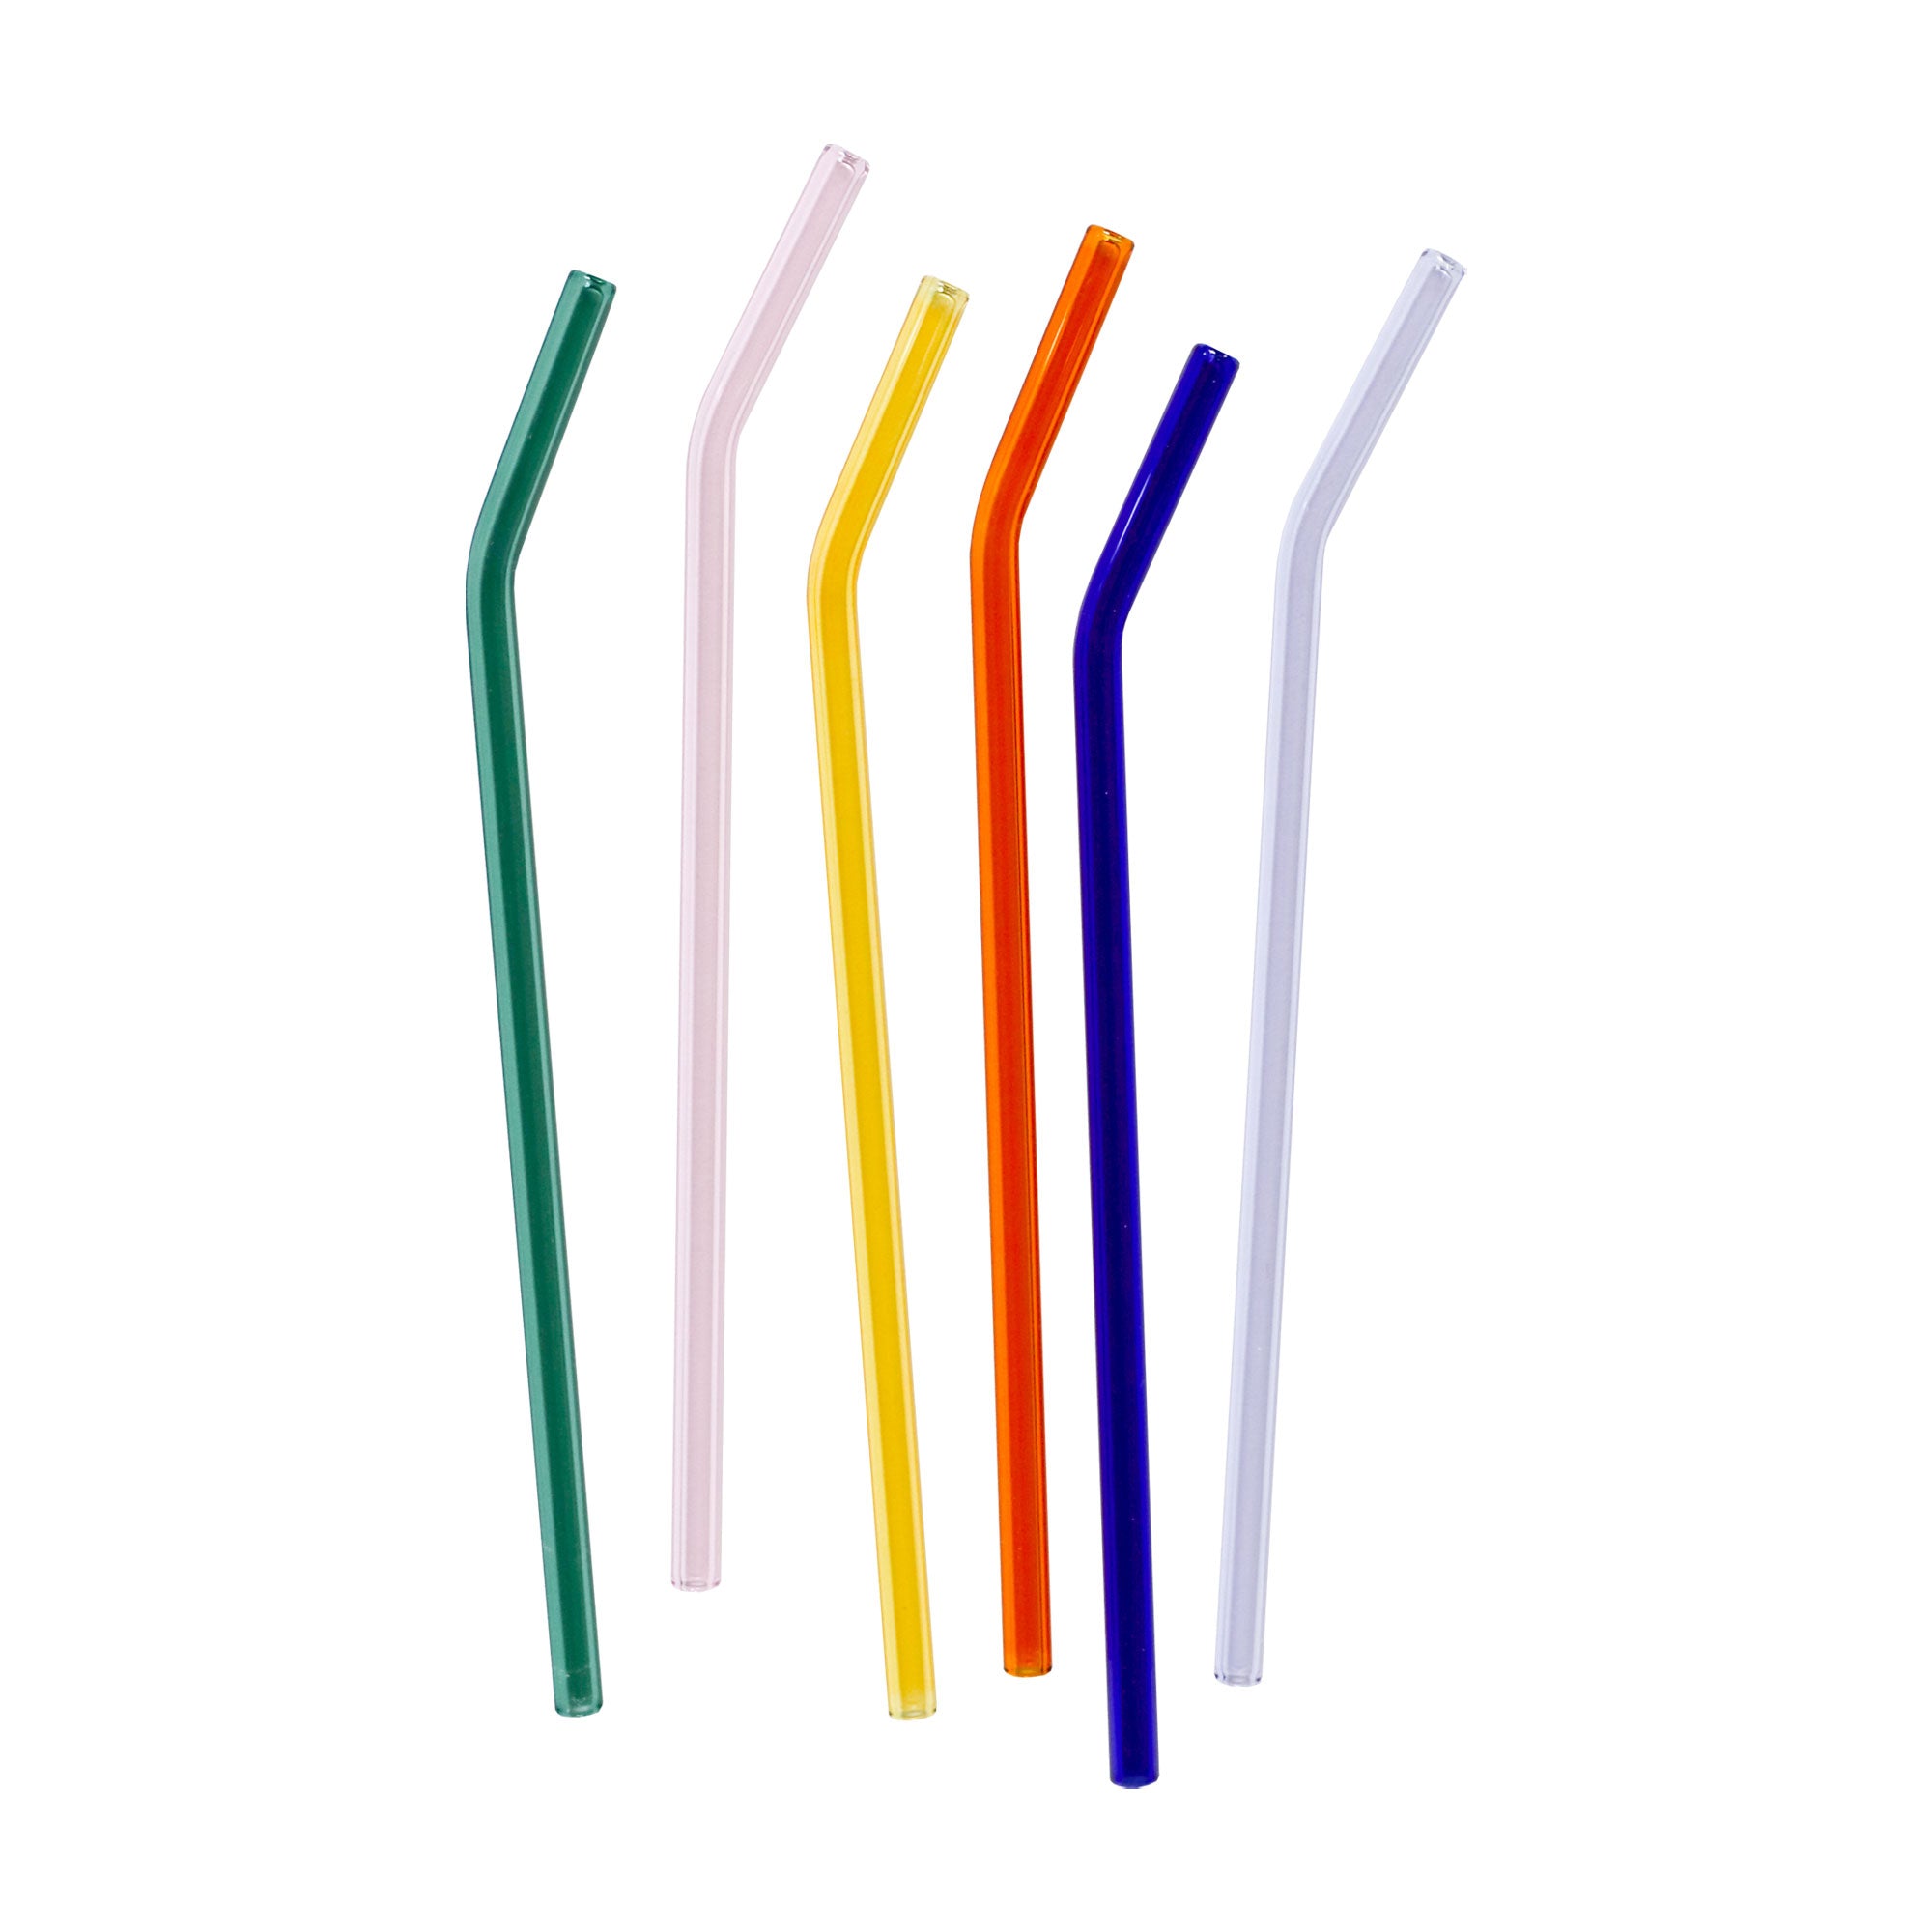  Reusable Glass Drinking Straws Set Of 6, Multi-Color